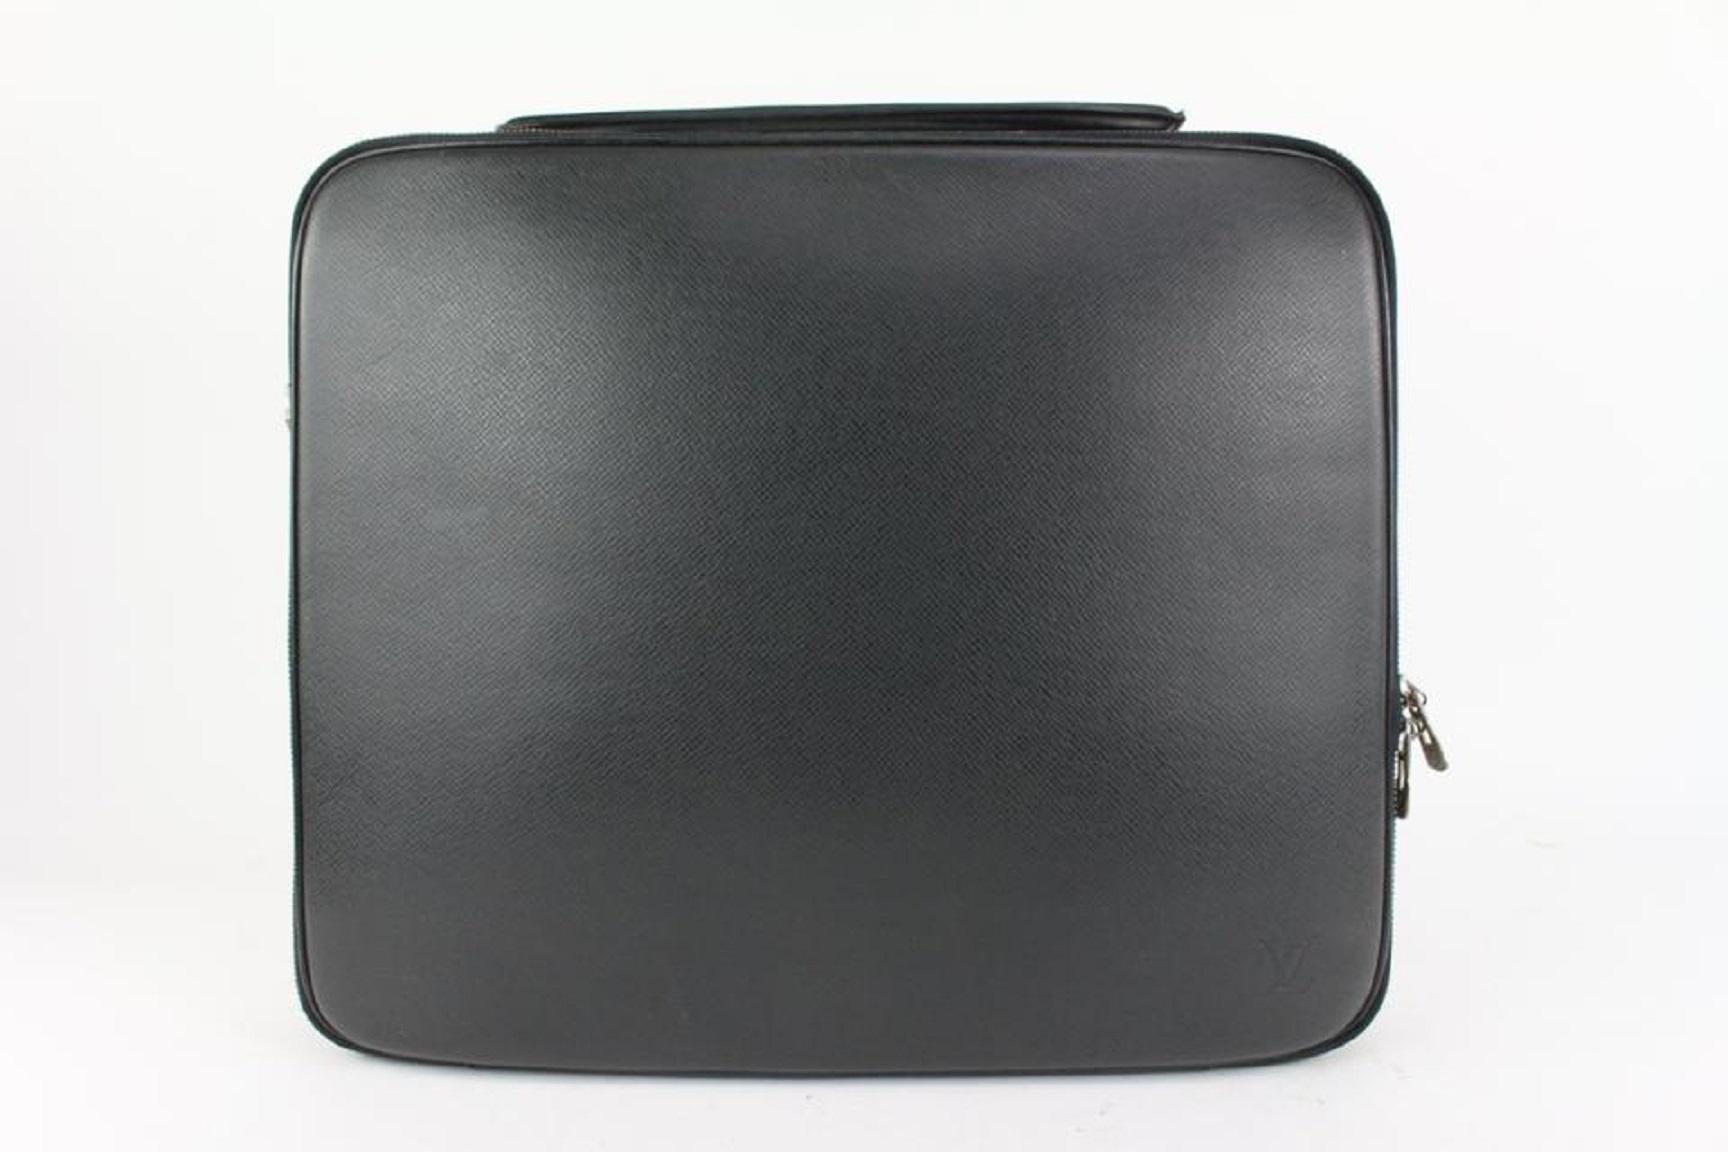 Louis Vuitton Black Taiga Leather Odessa Laptop Bag 917lv17 In Good Condition For Sale In Dix hills, NY